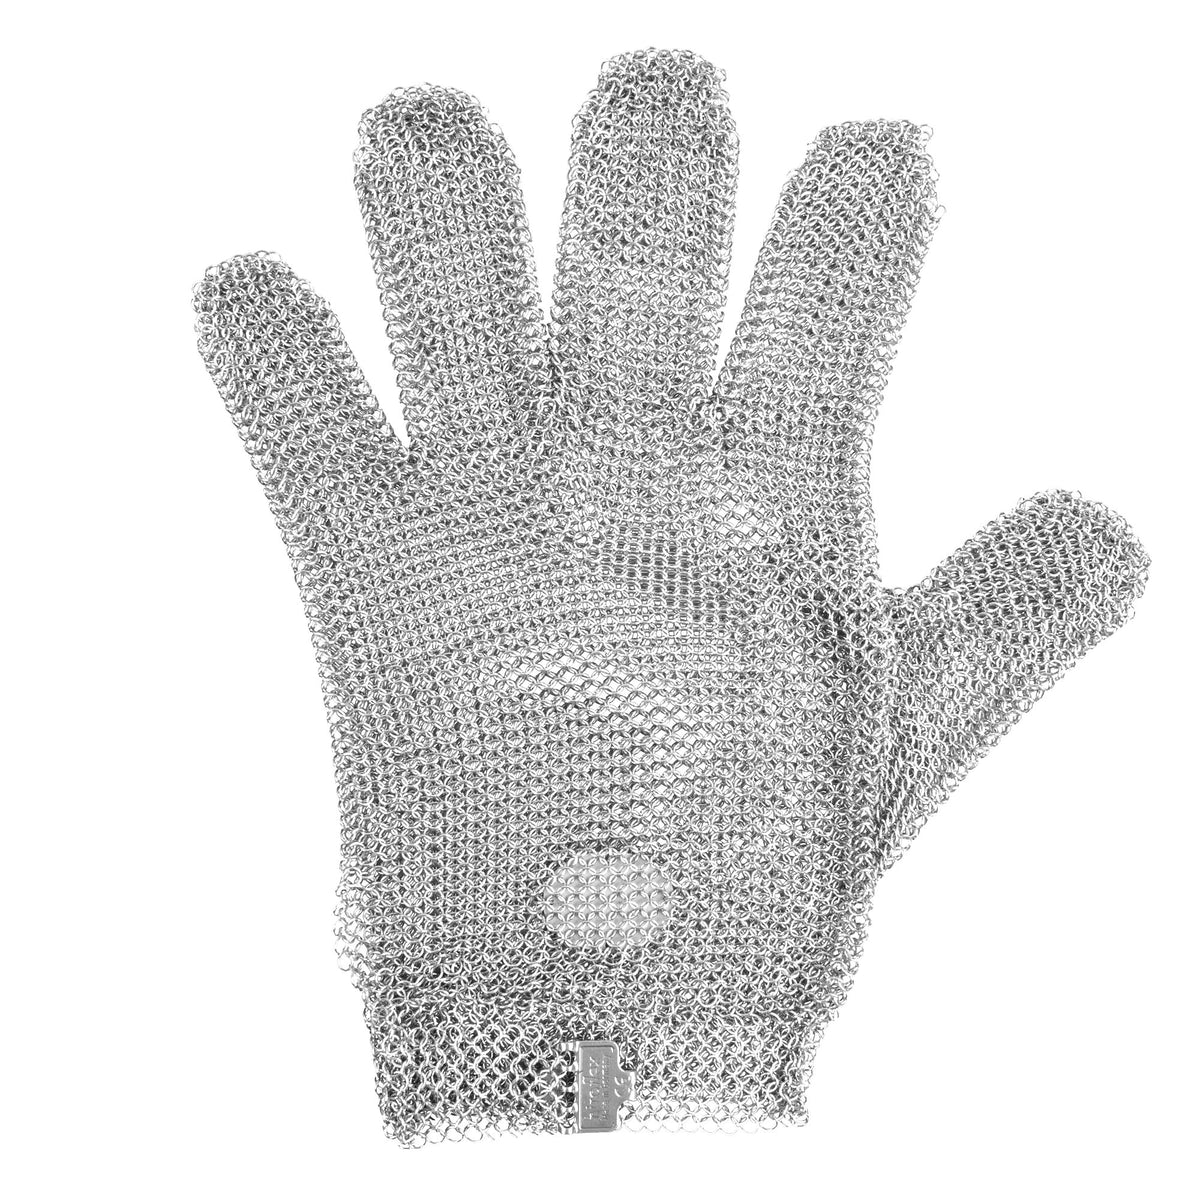 Chainmail Gloves as Butcher Gloves or Oyster Gloves